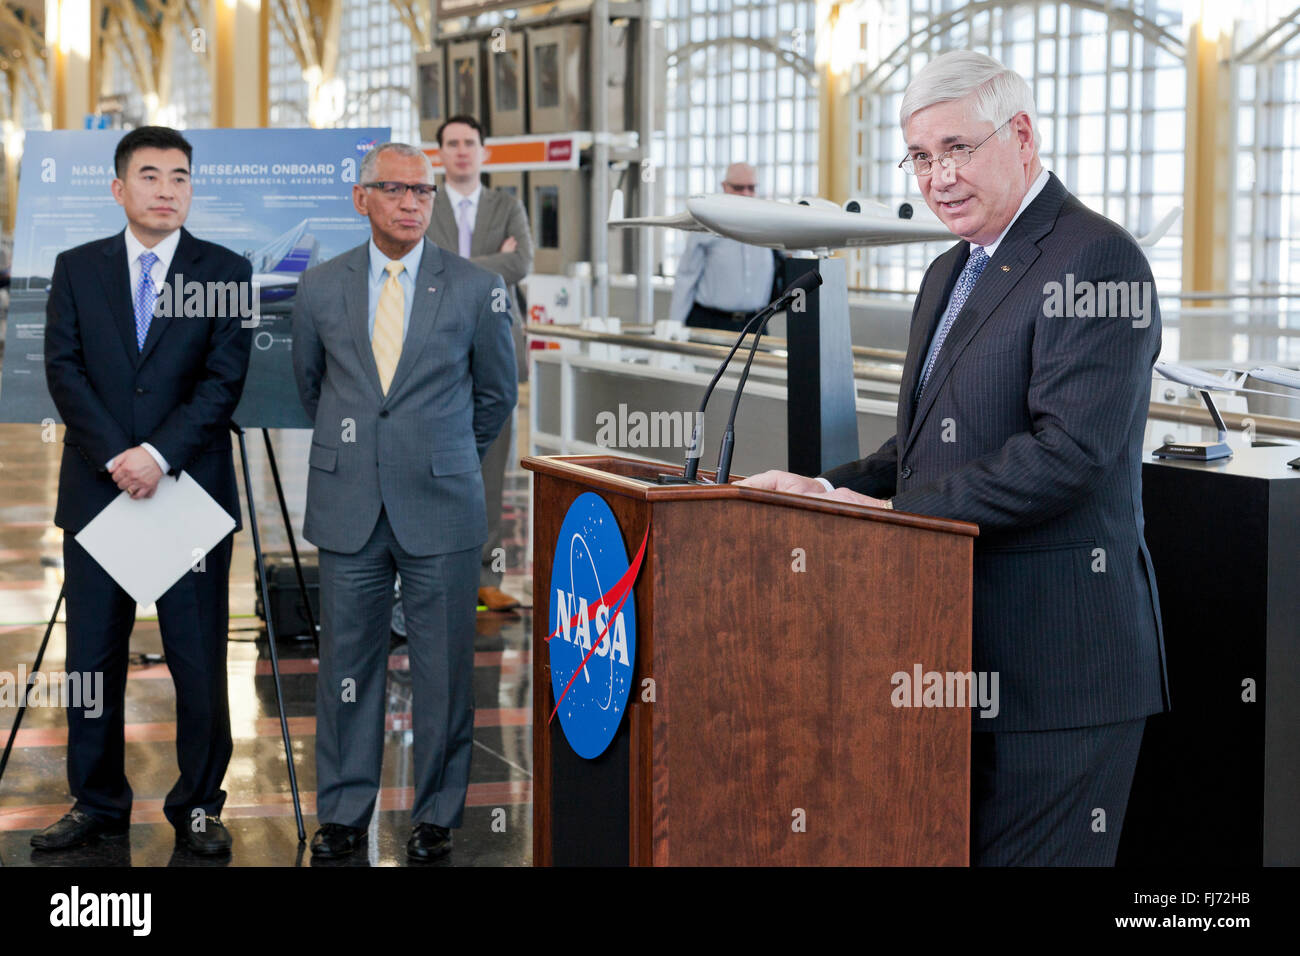 Washington, DC, USA. 29th February, 2016. NASA administrator Charles Bolden announces the return of supersonic passenger air travel and awarded the $20 million contract to Lockheed Martin for the design of the first Quiet Supersonic Transport (QueSST) aircraft, in a series of the larger New Aviation Horizons X-planes project. Credit:  B Christopher/Alamy Live News Stock Photo